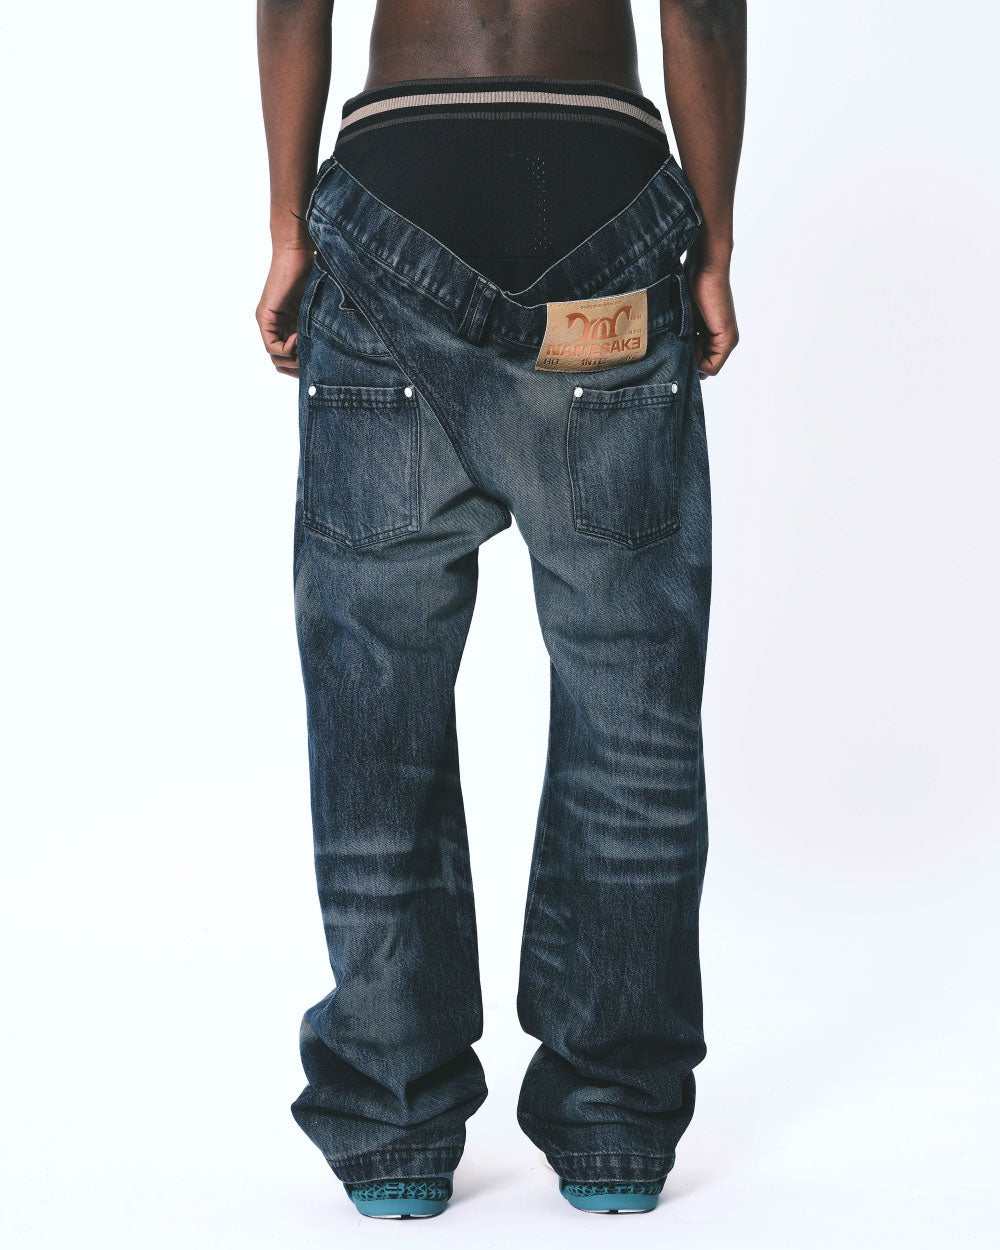 Del Cross Over Low Ride Jeans